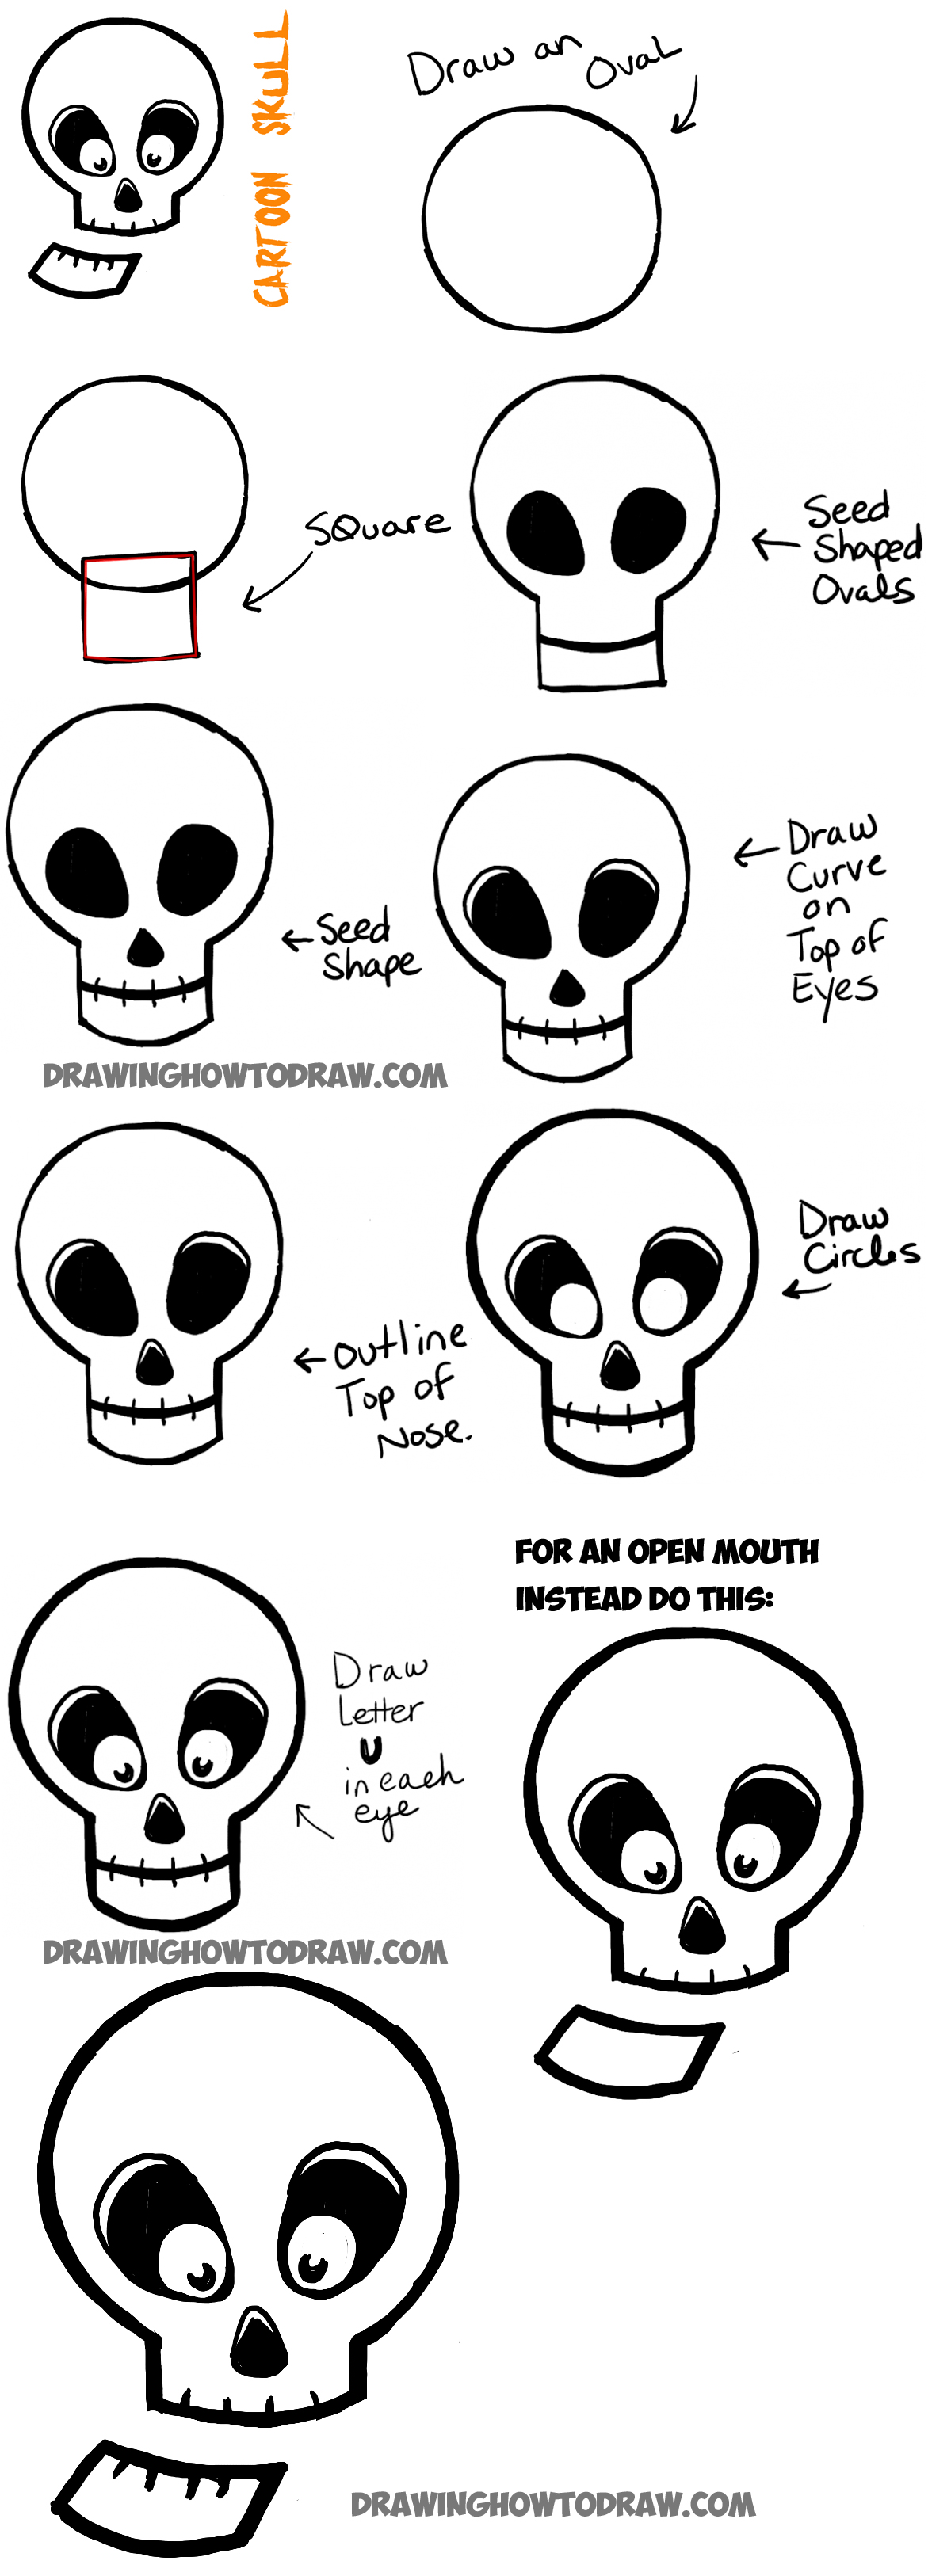 How to draw step by step halloween | wi9lson's blog